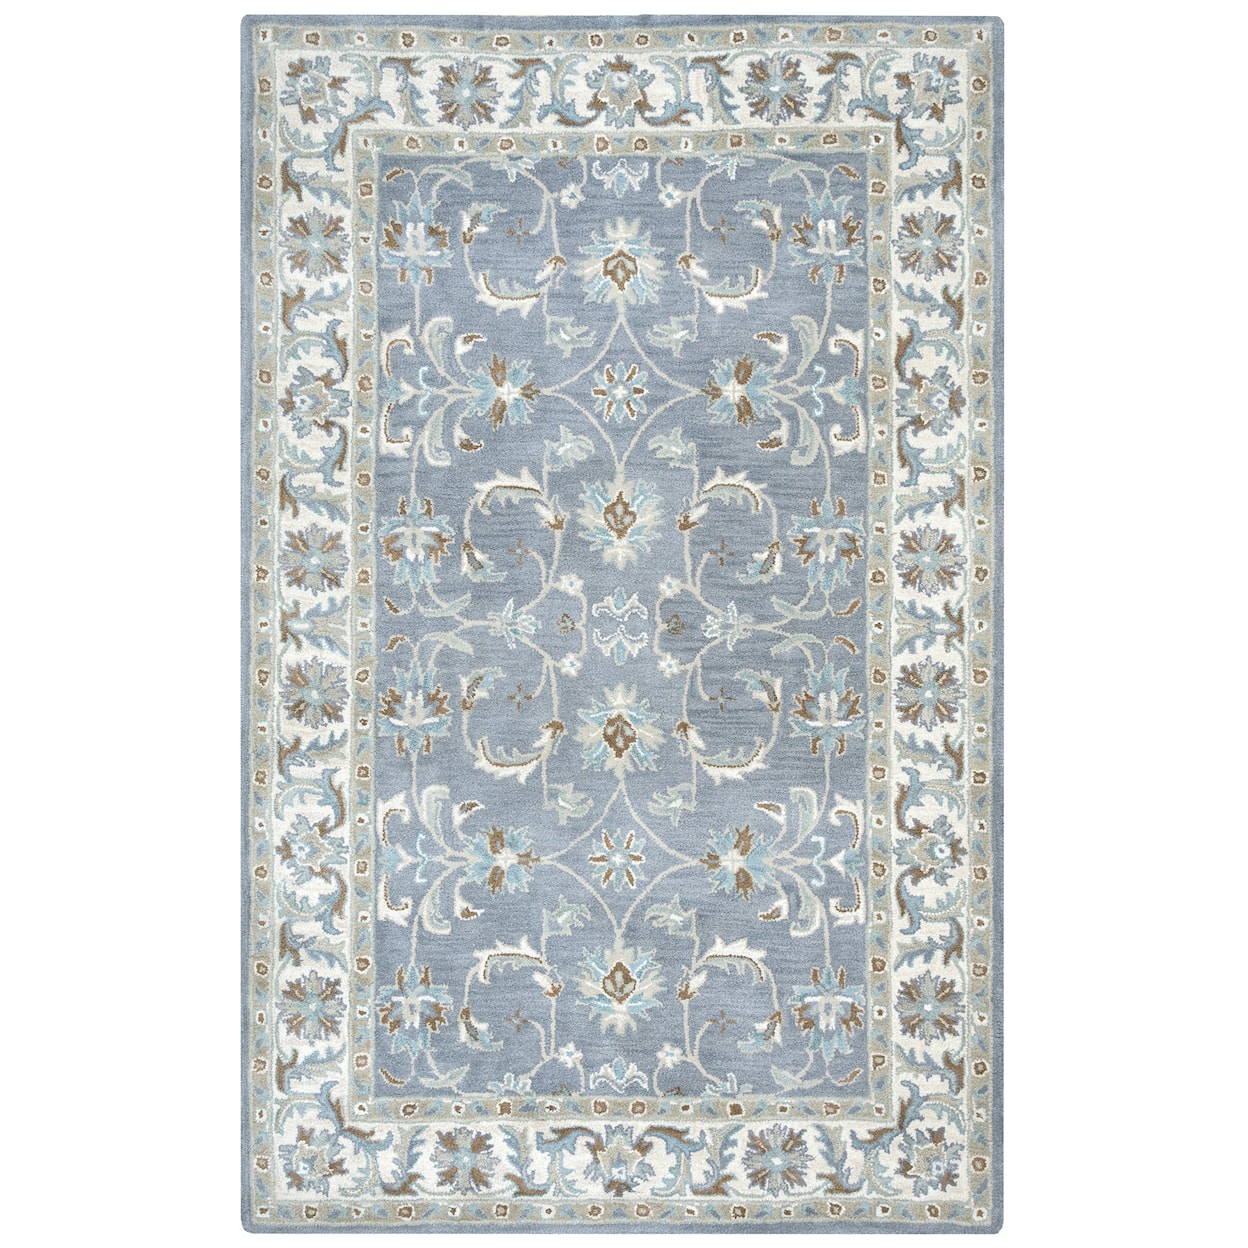 Rizzy Home Arden Loft-Crown Way 2'6" x 8' Rectangle Rug